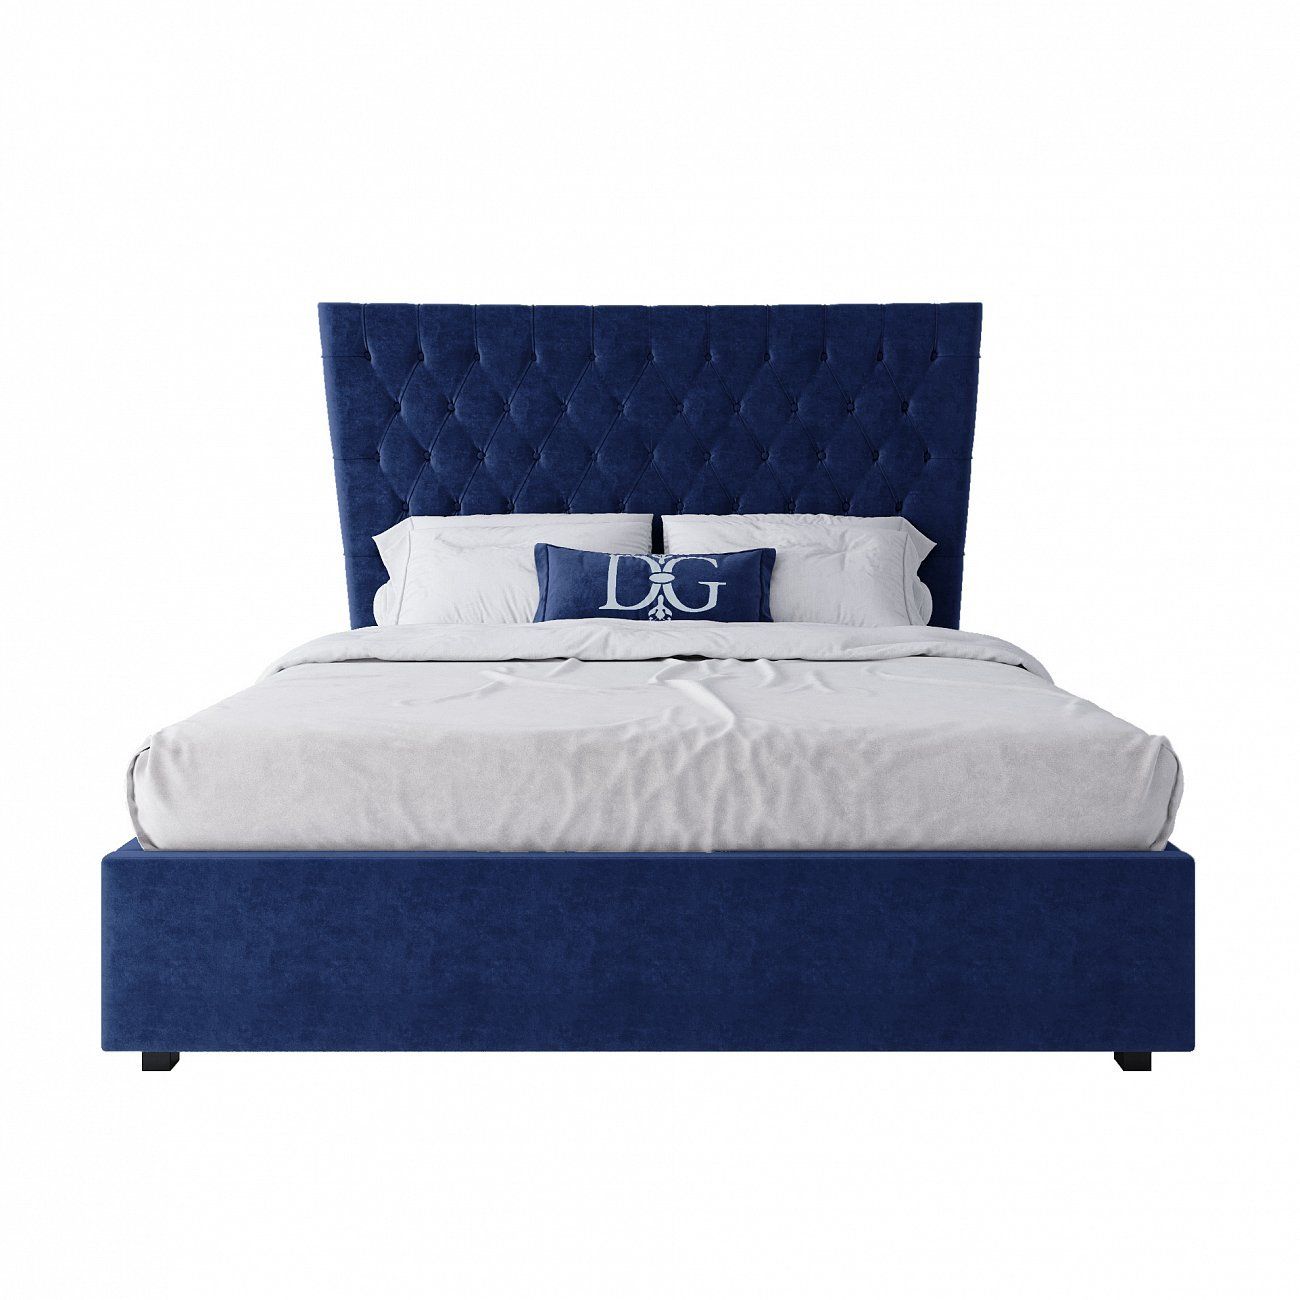 Double bed with upholstered headboard 160x200 cm blue QuickSand